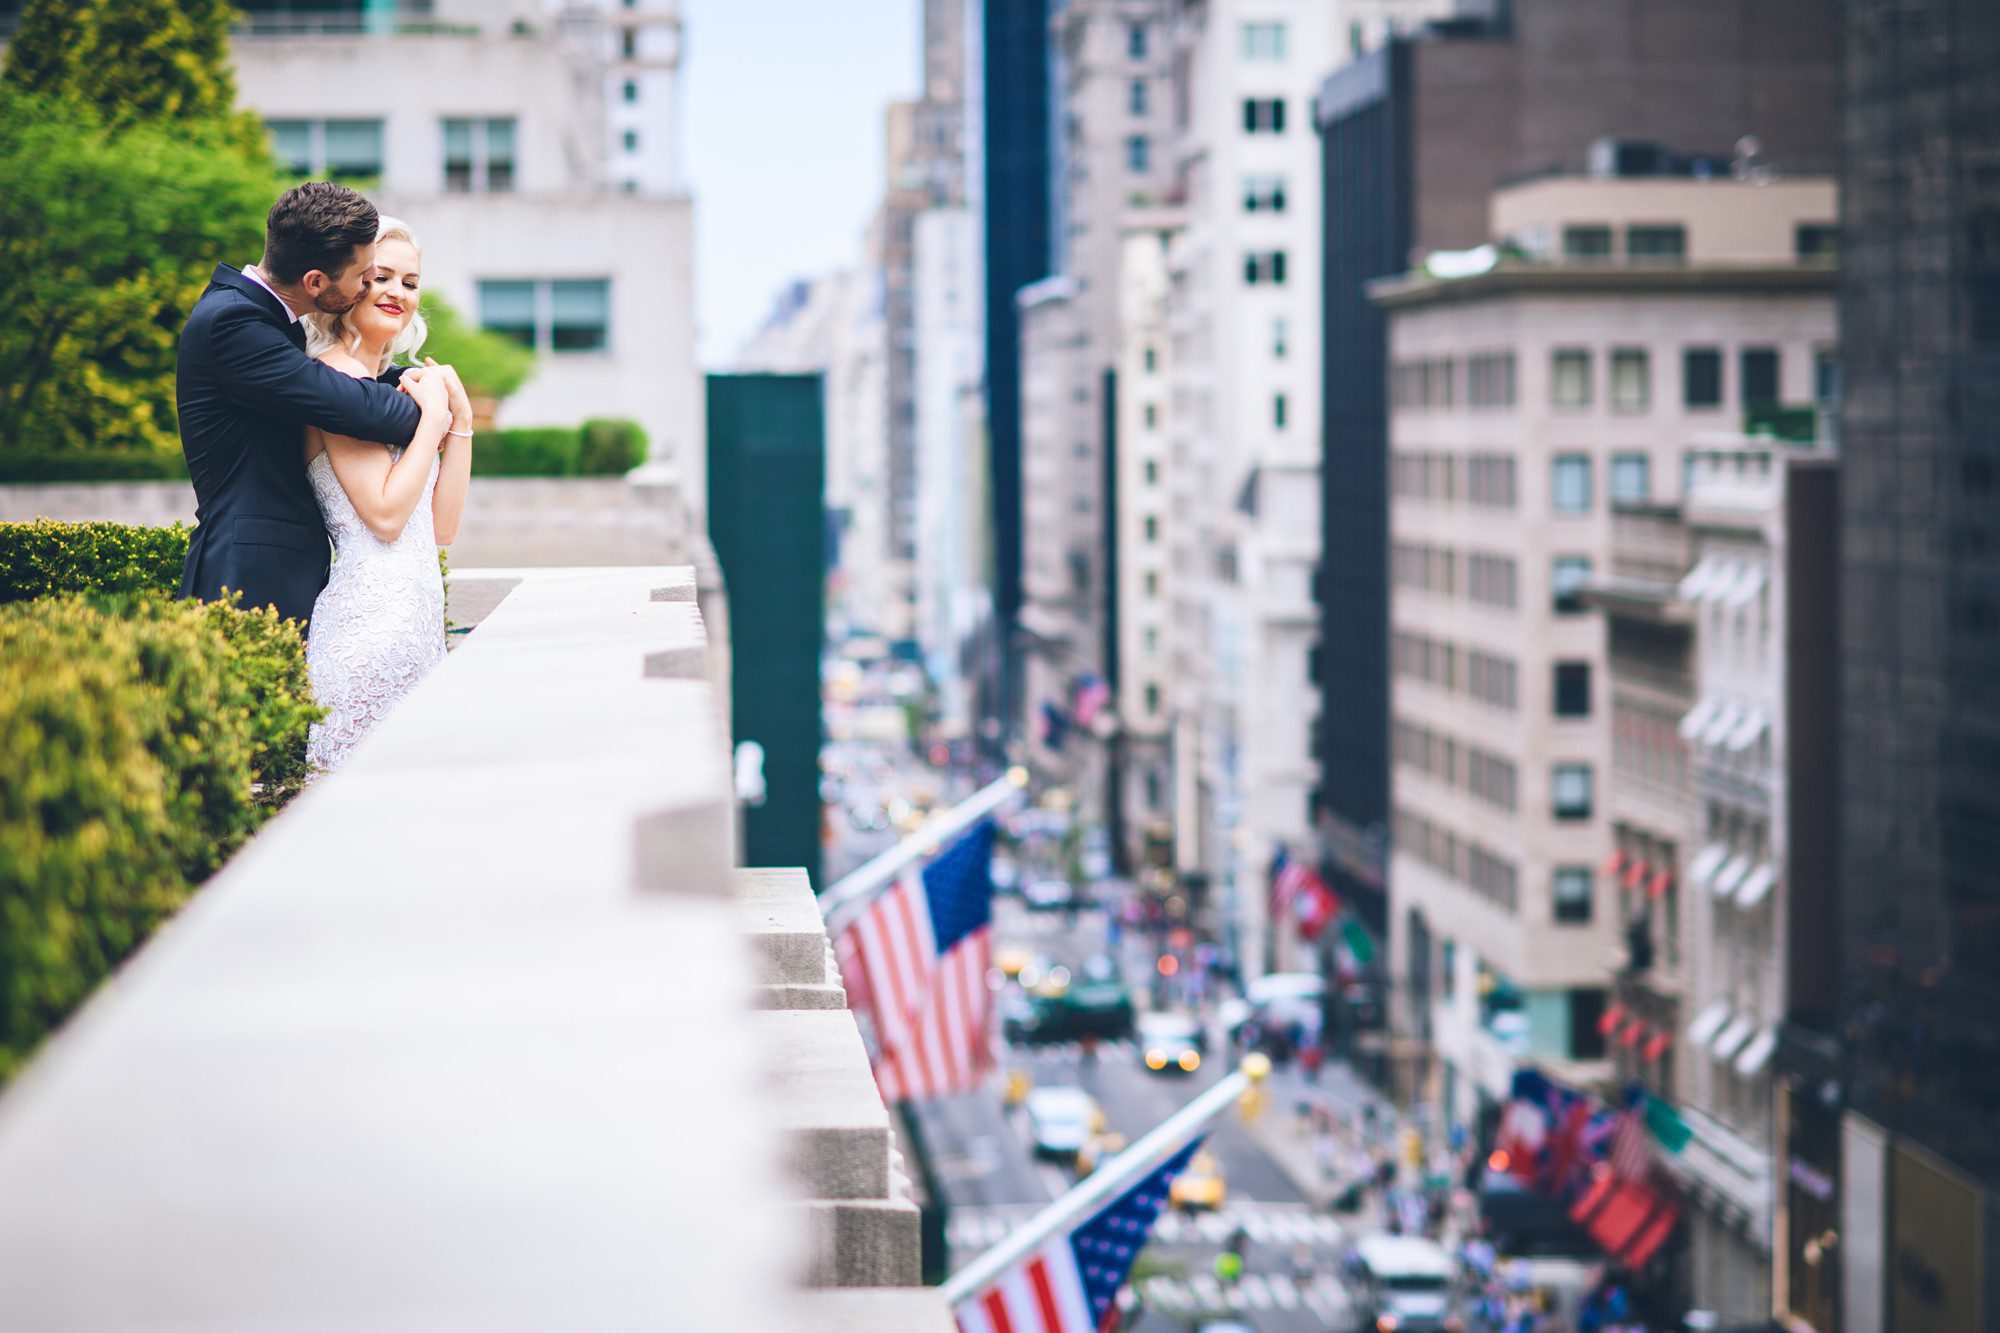 Most Popular Places for Wedding Photos in New York